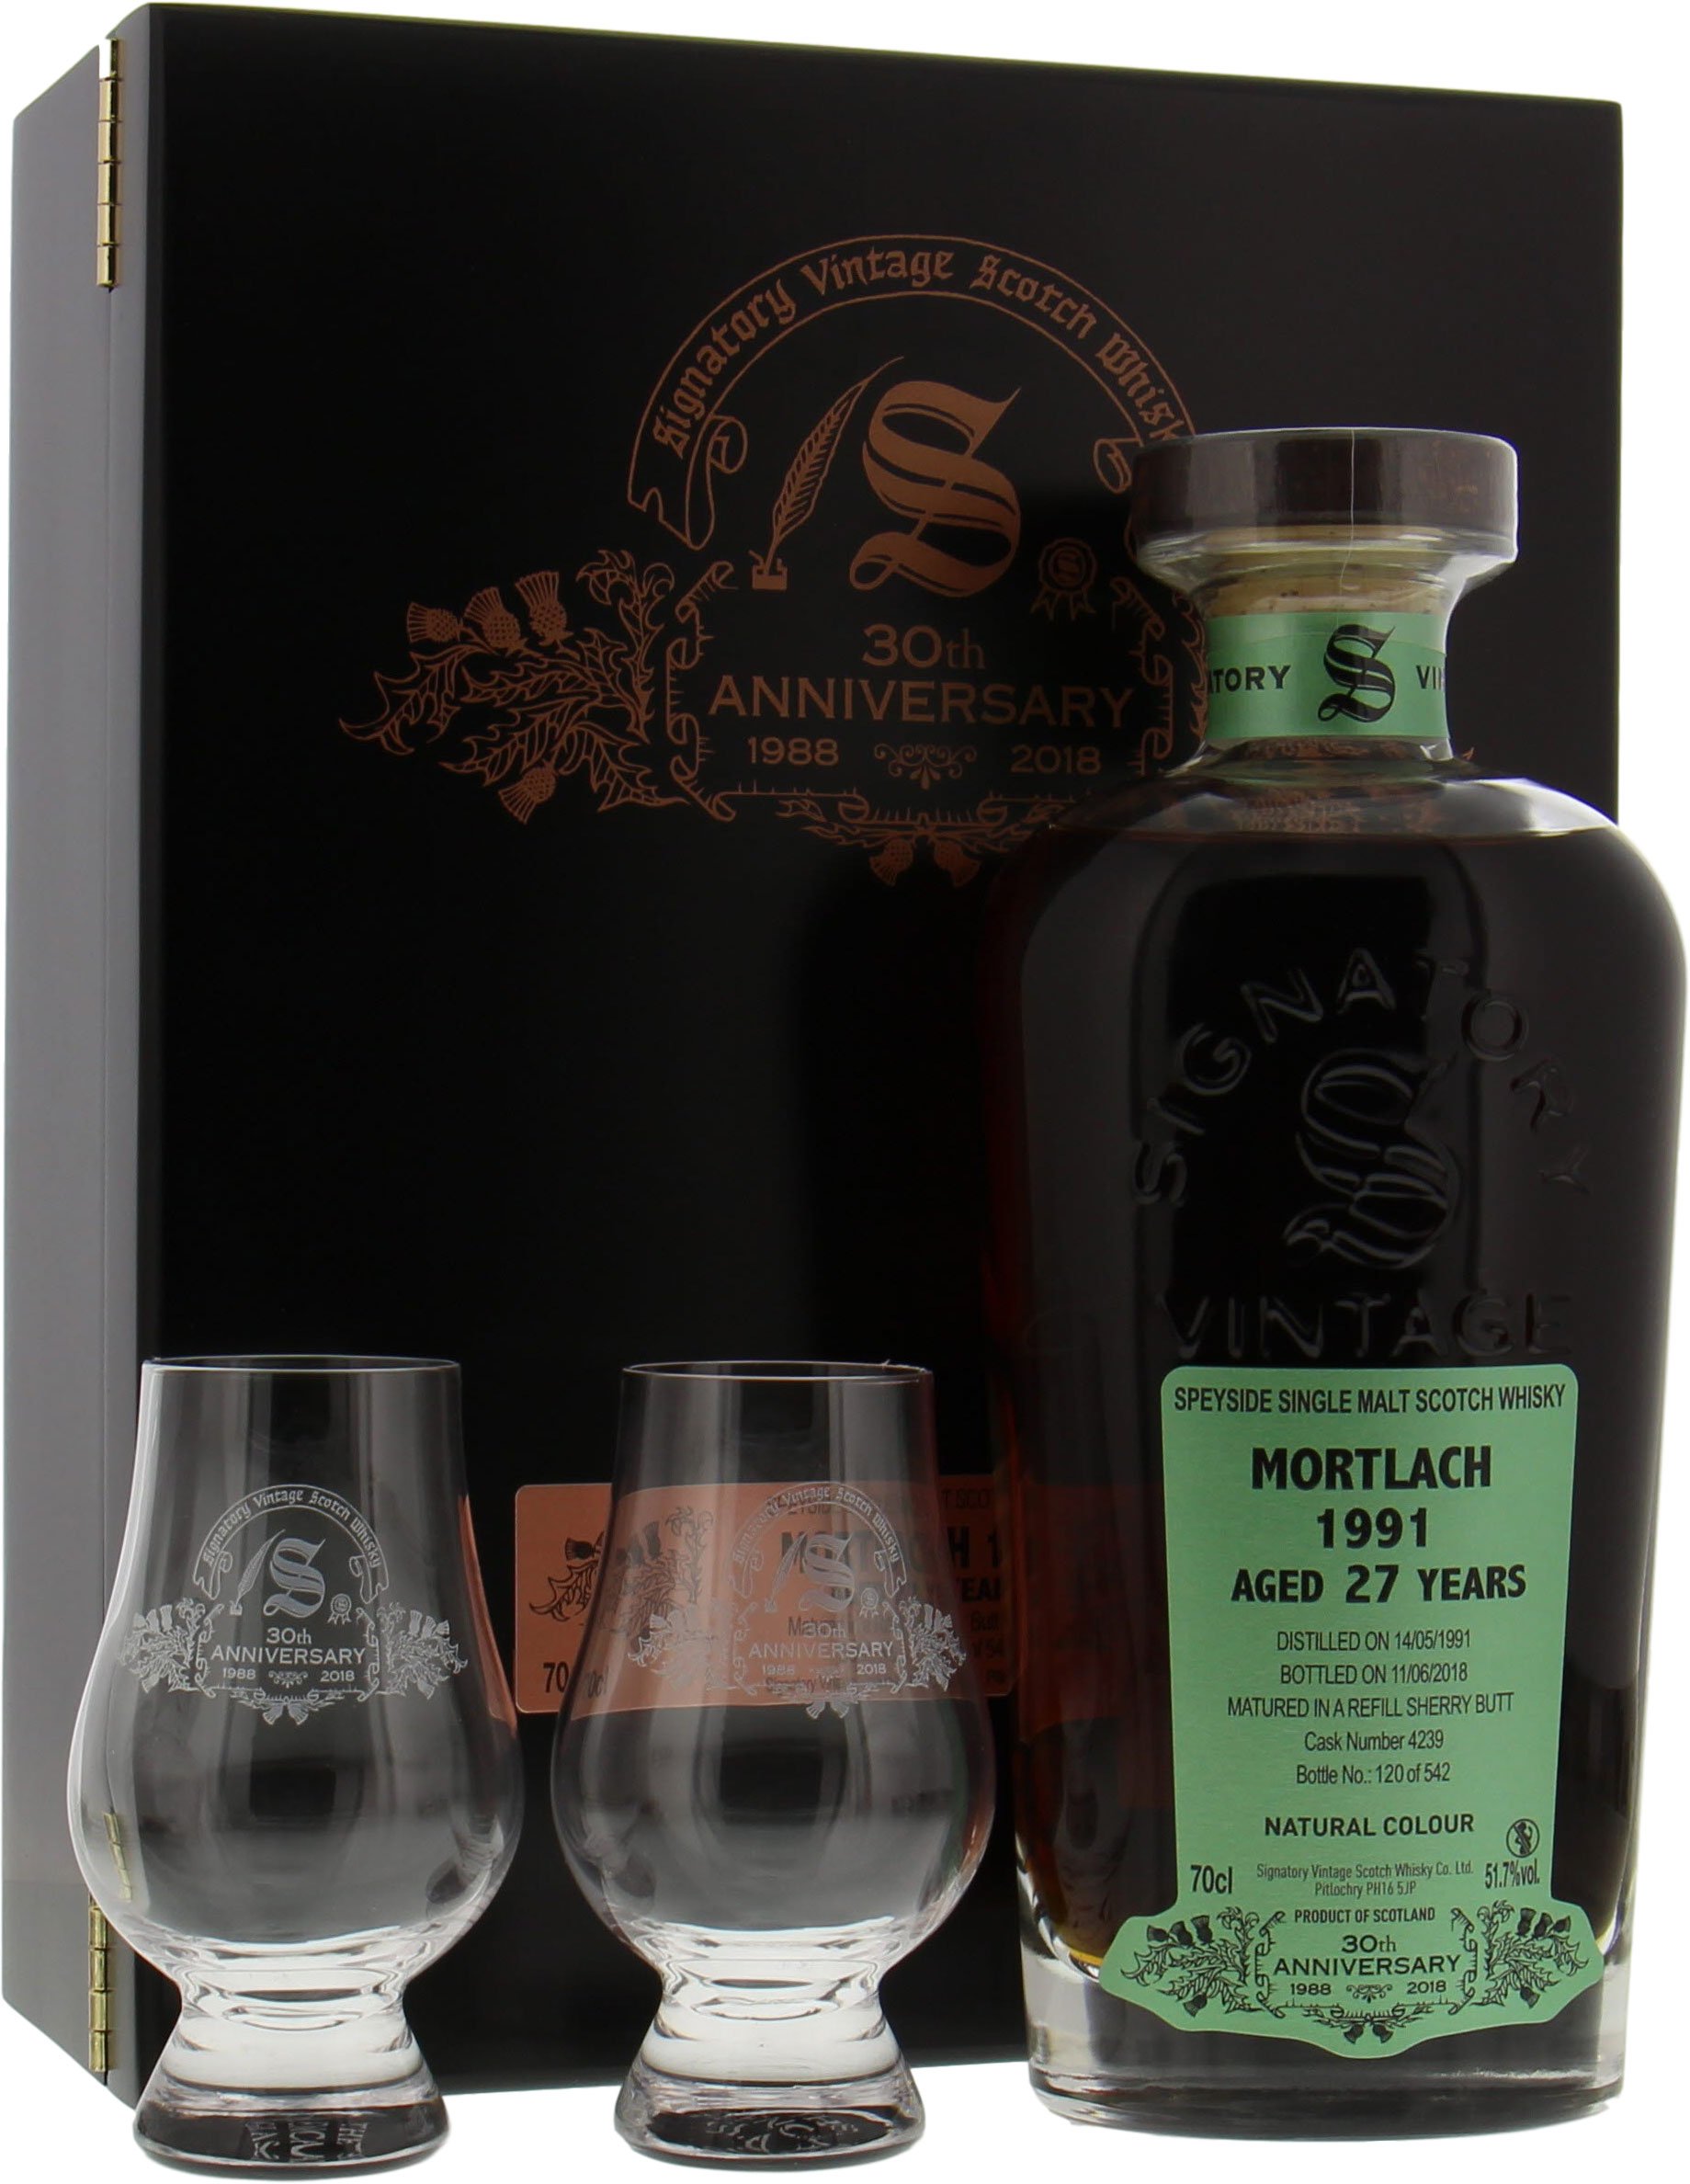 Mortlach - 27 Years Old Signatory 30th Anniversary Cask 4239 51.7% 1991